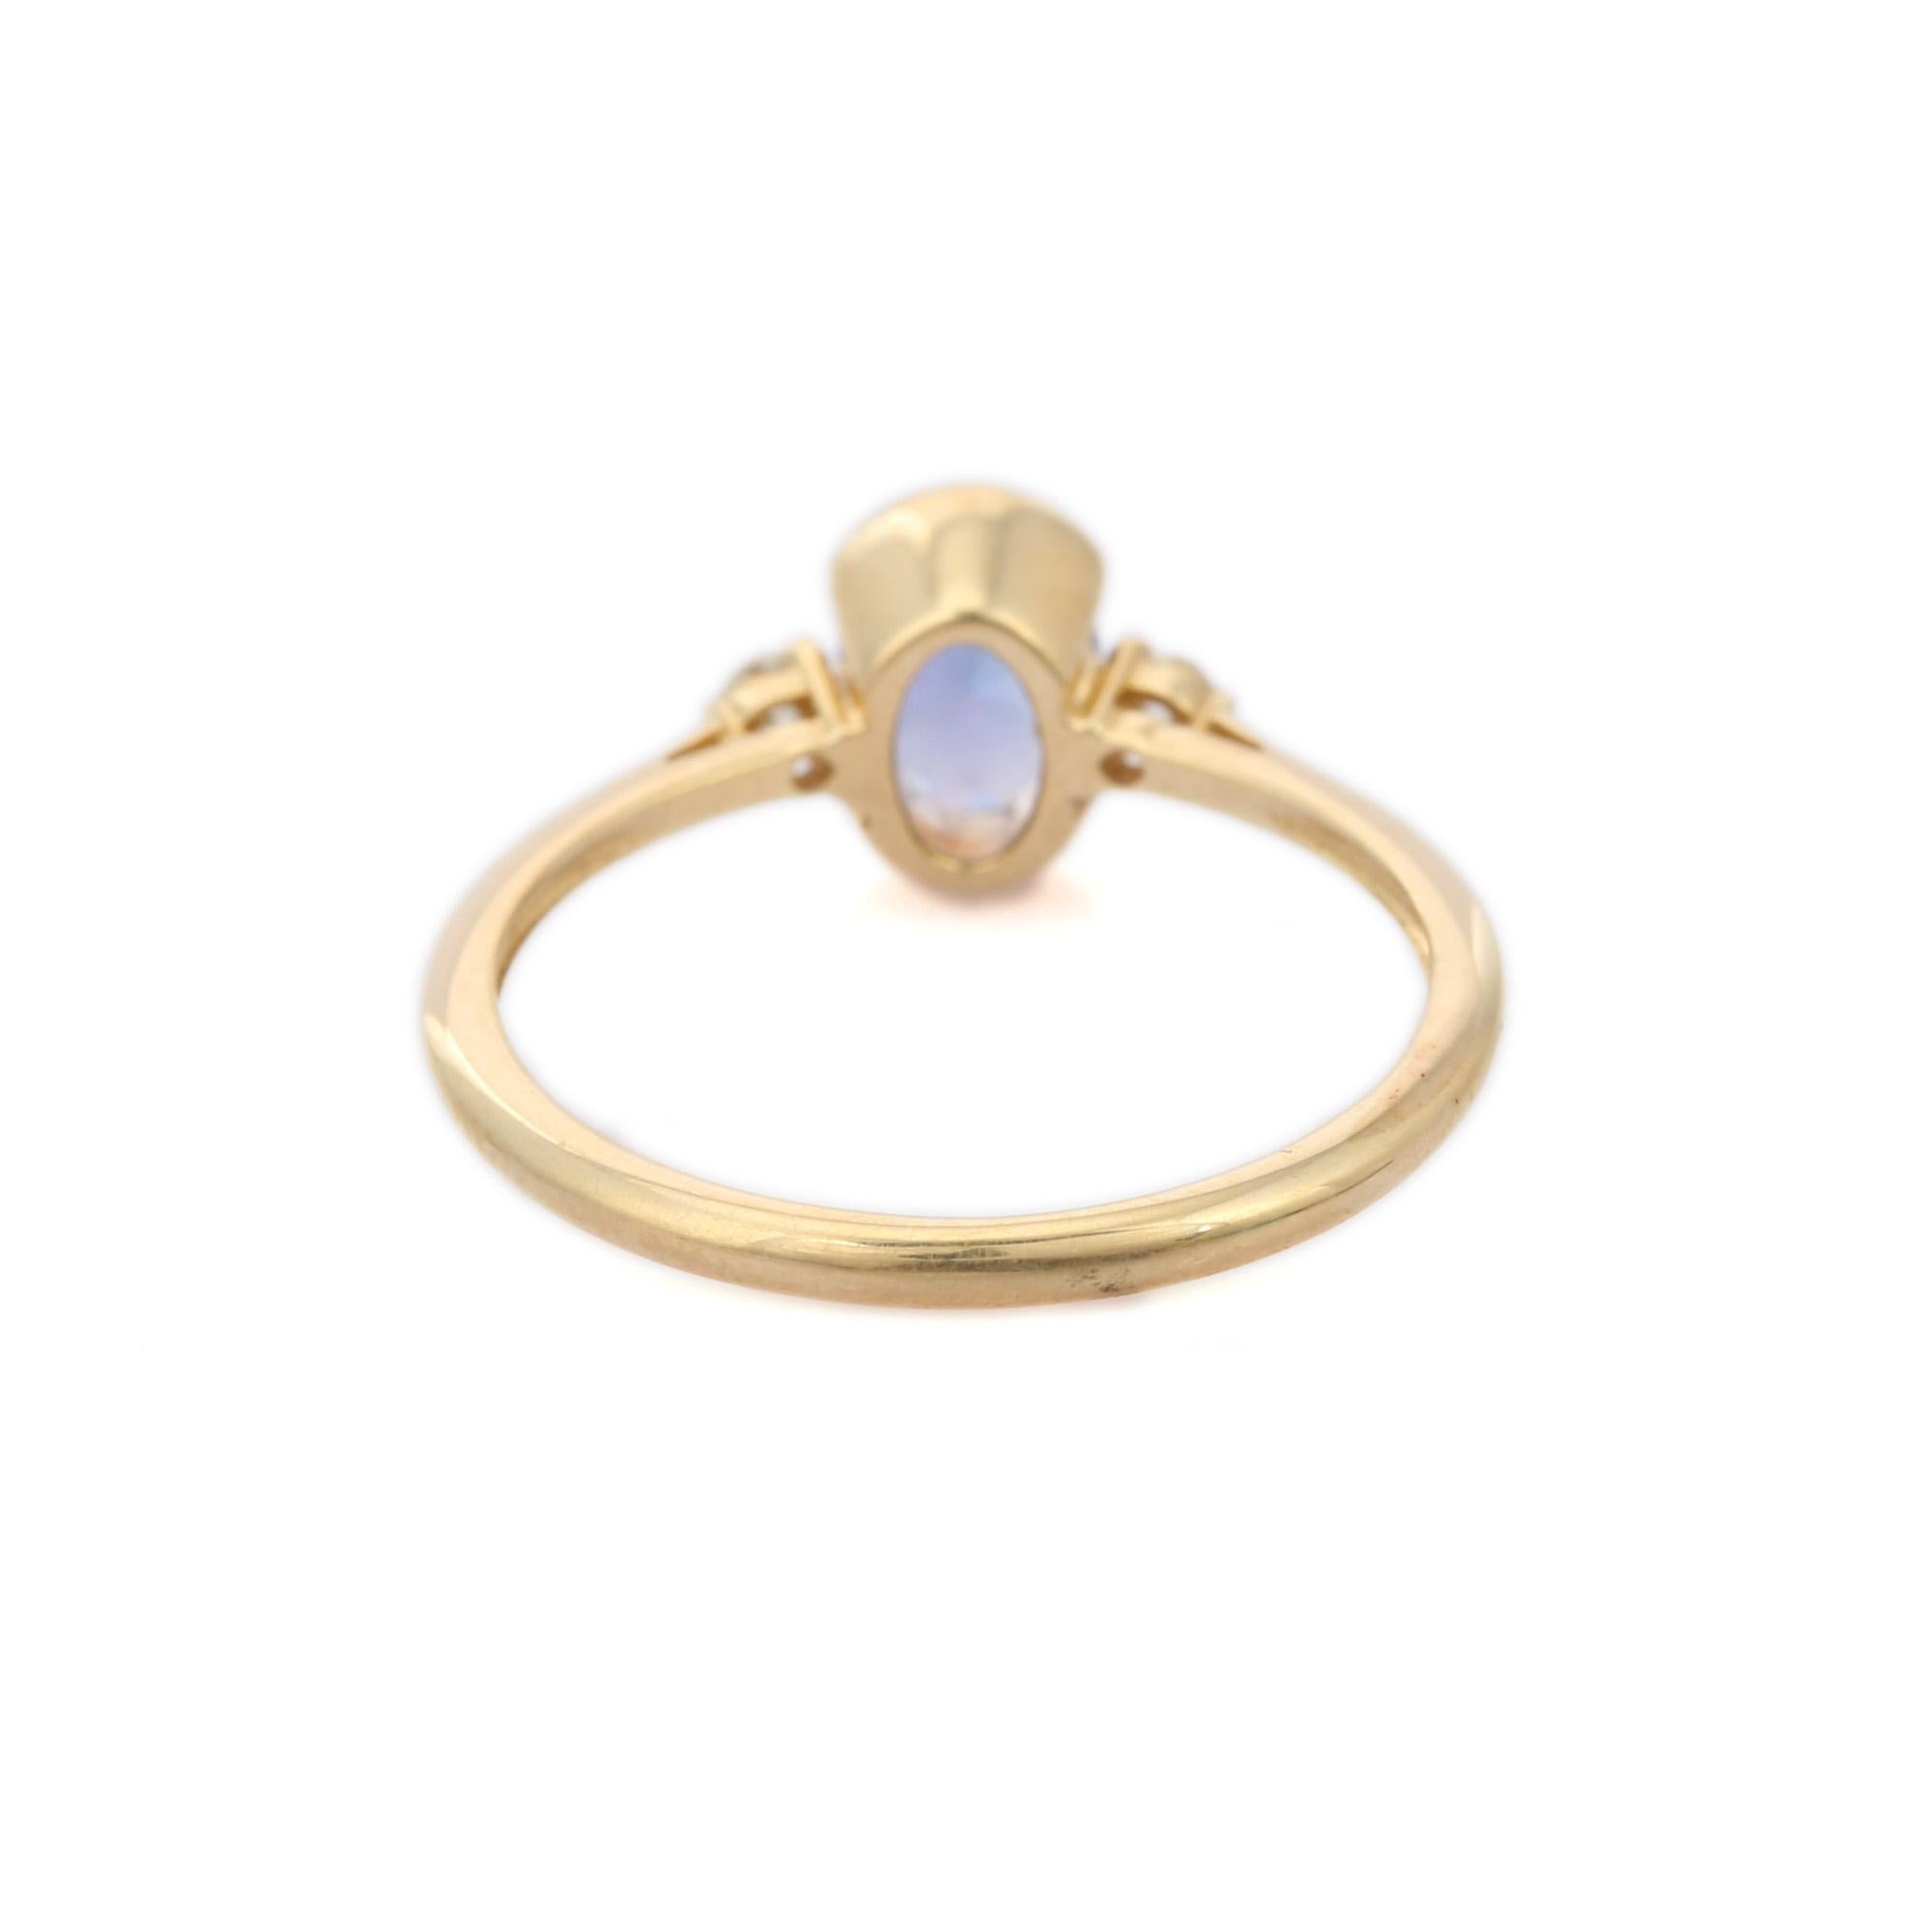 For Sale:  Certified 0.8 Carat Tanzanite and Diamond Dainty Ring in 14K Yellow Gold 3